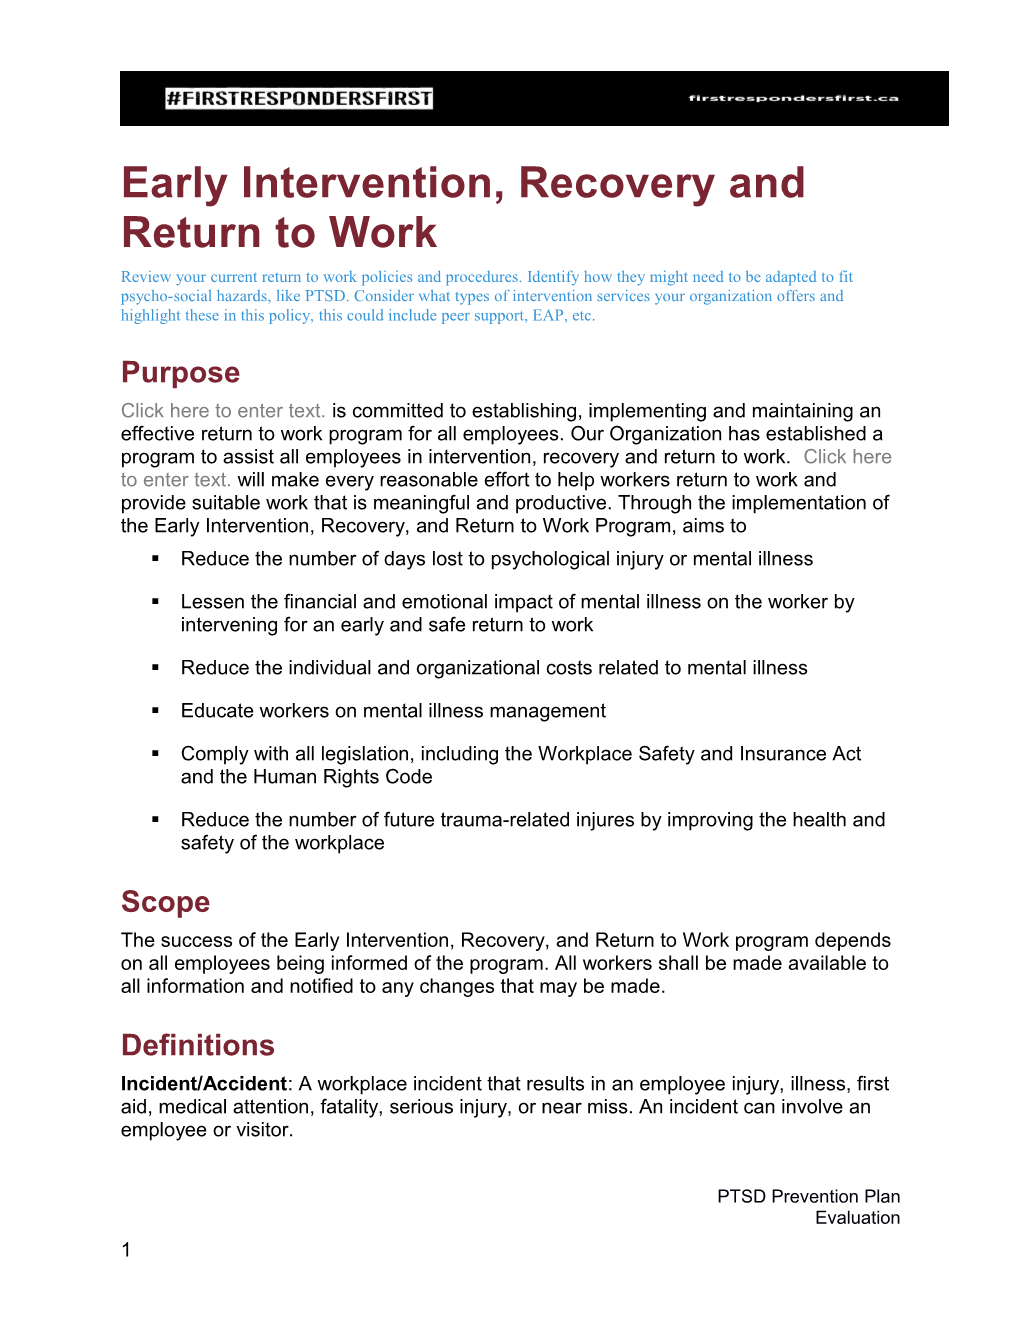 Early Intervention, Recovery and Return to Work